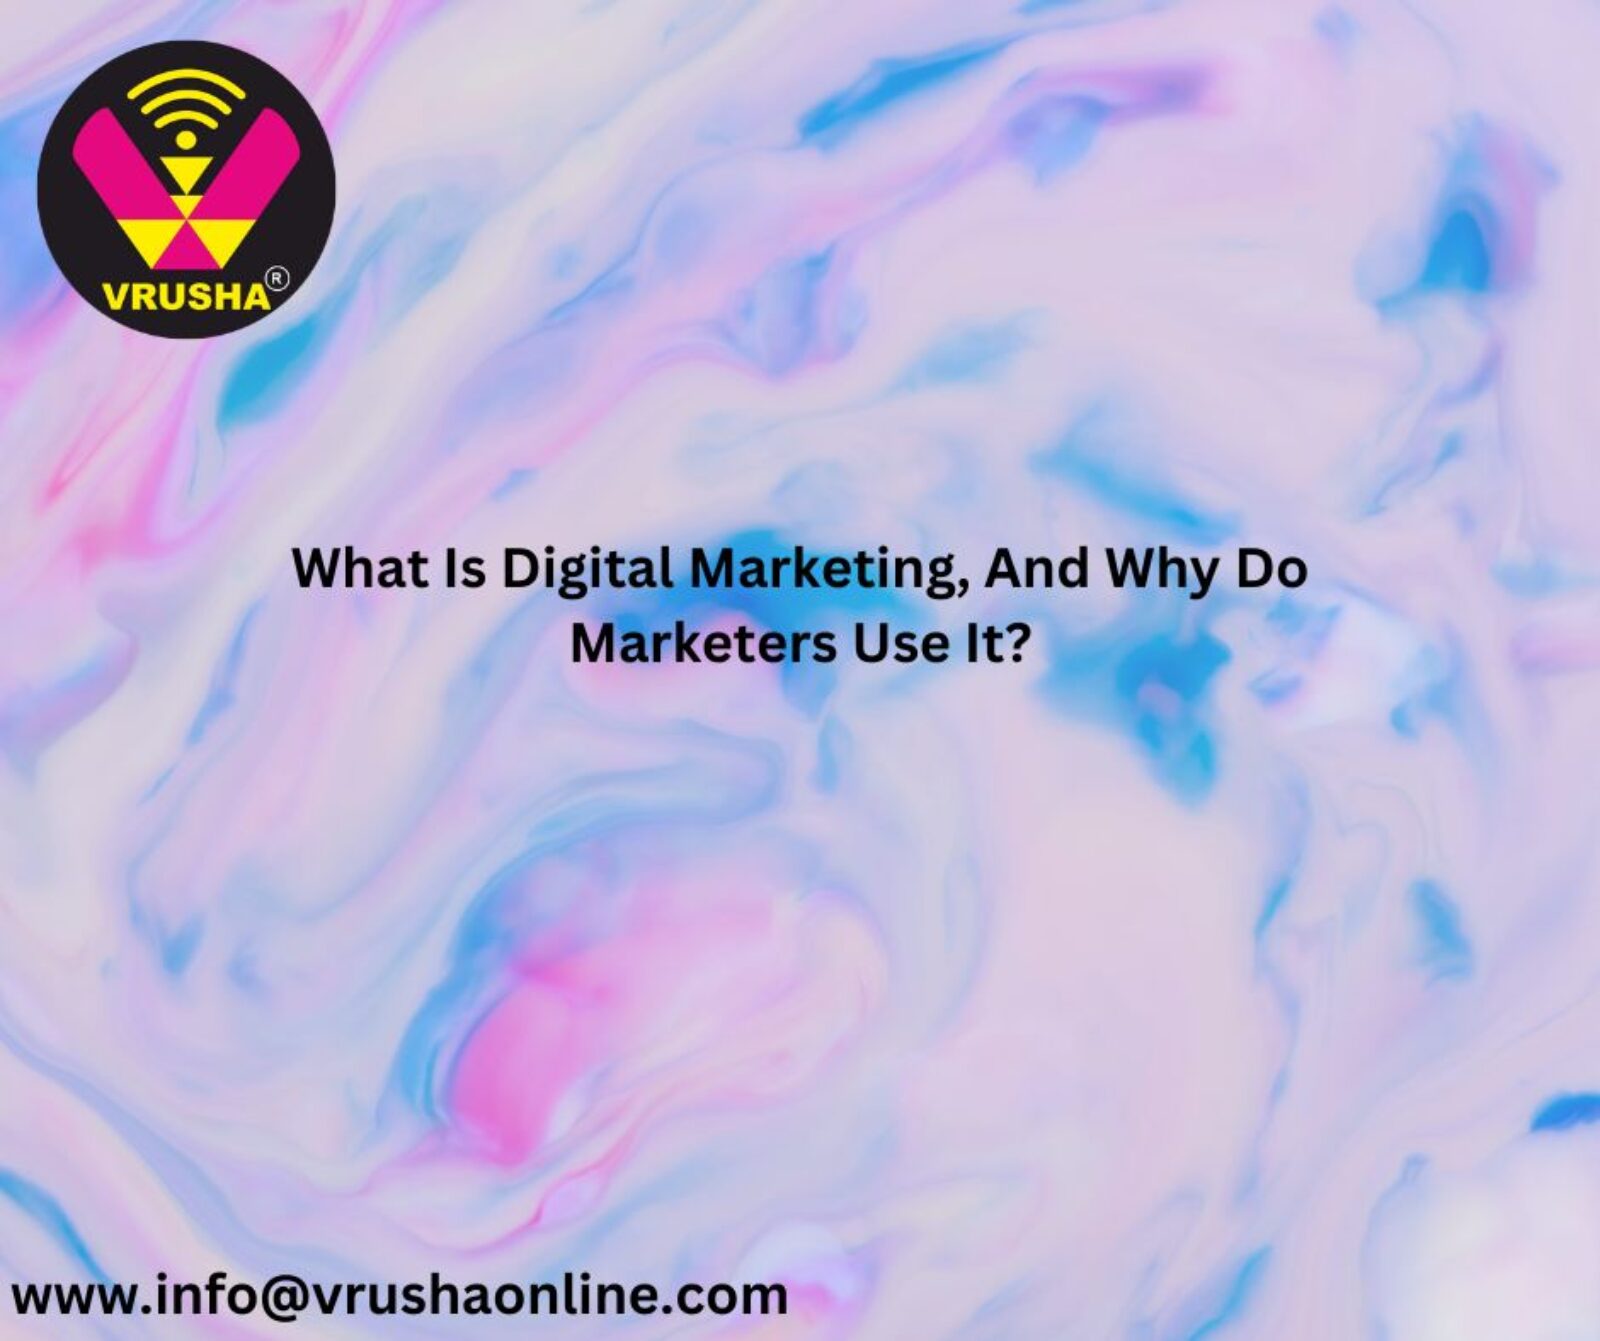 What Is Digital Marketing, And Why Do Marketers Use It?